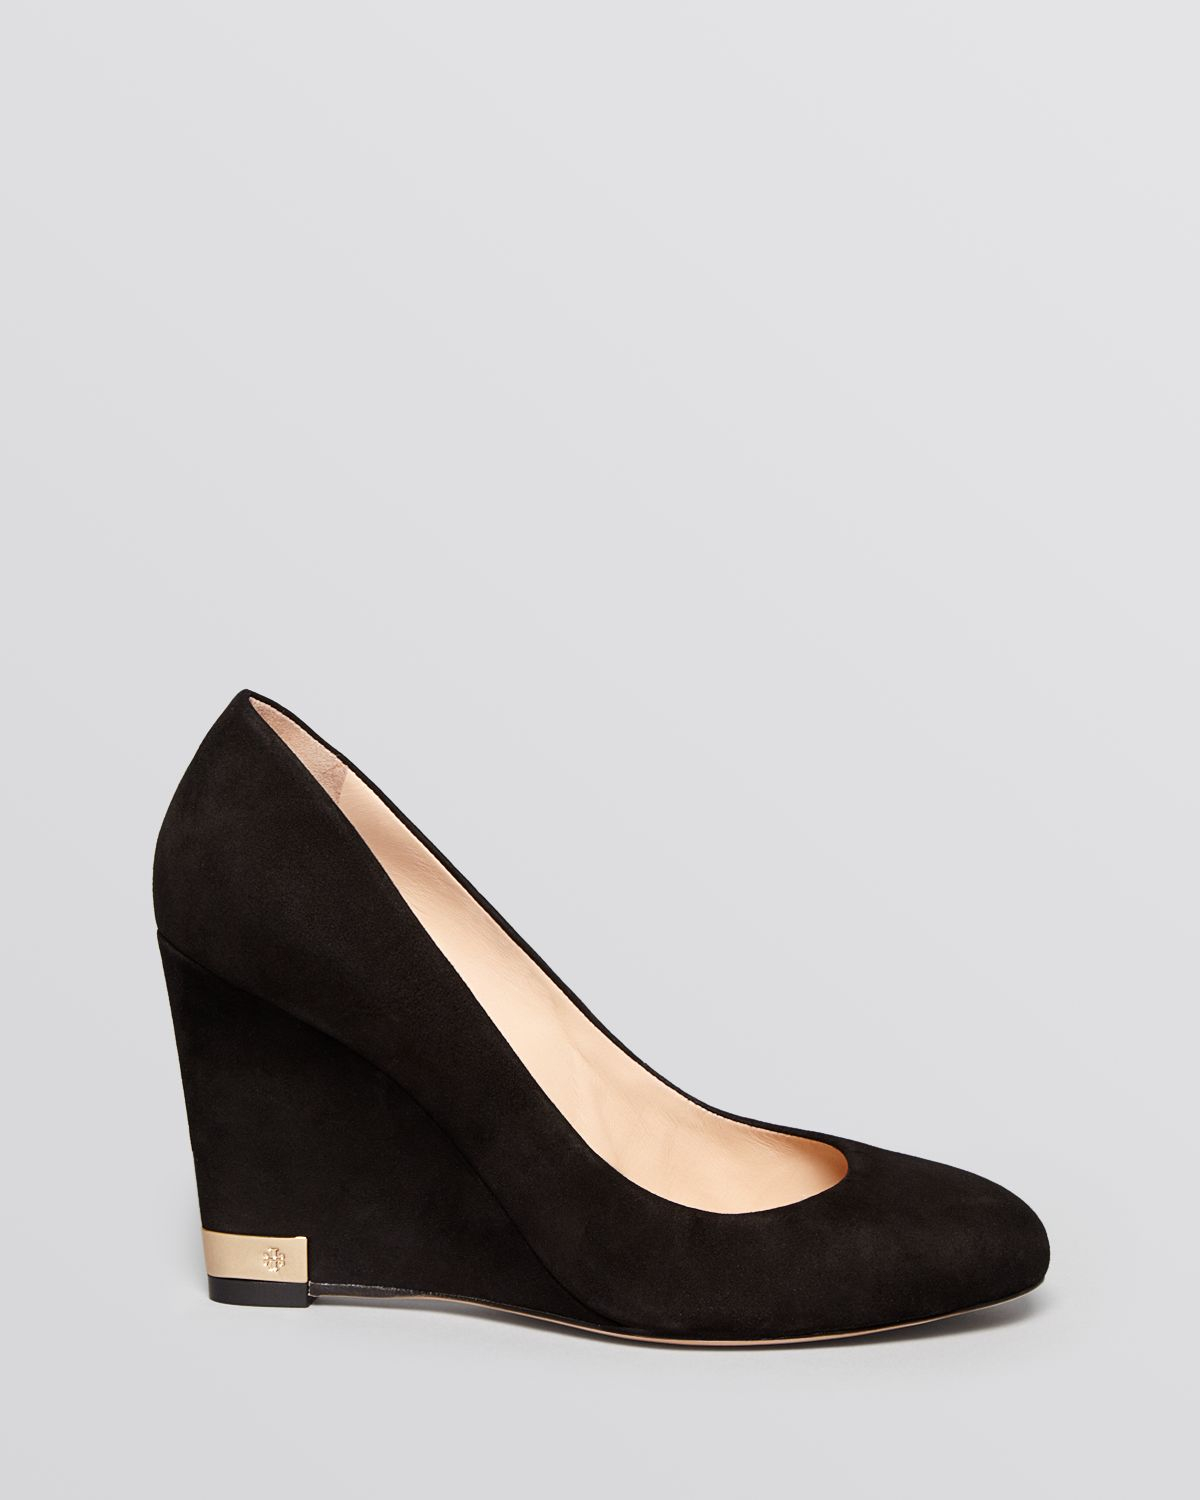 Tory Burch Black Wedge Shoes: Get a closer look with 33+ images ...